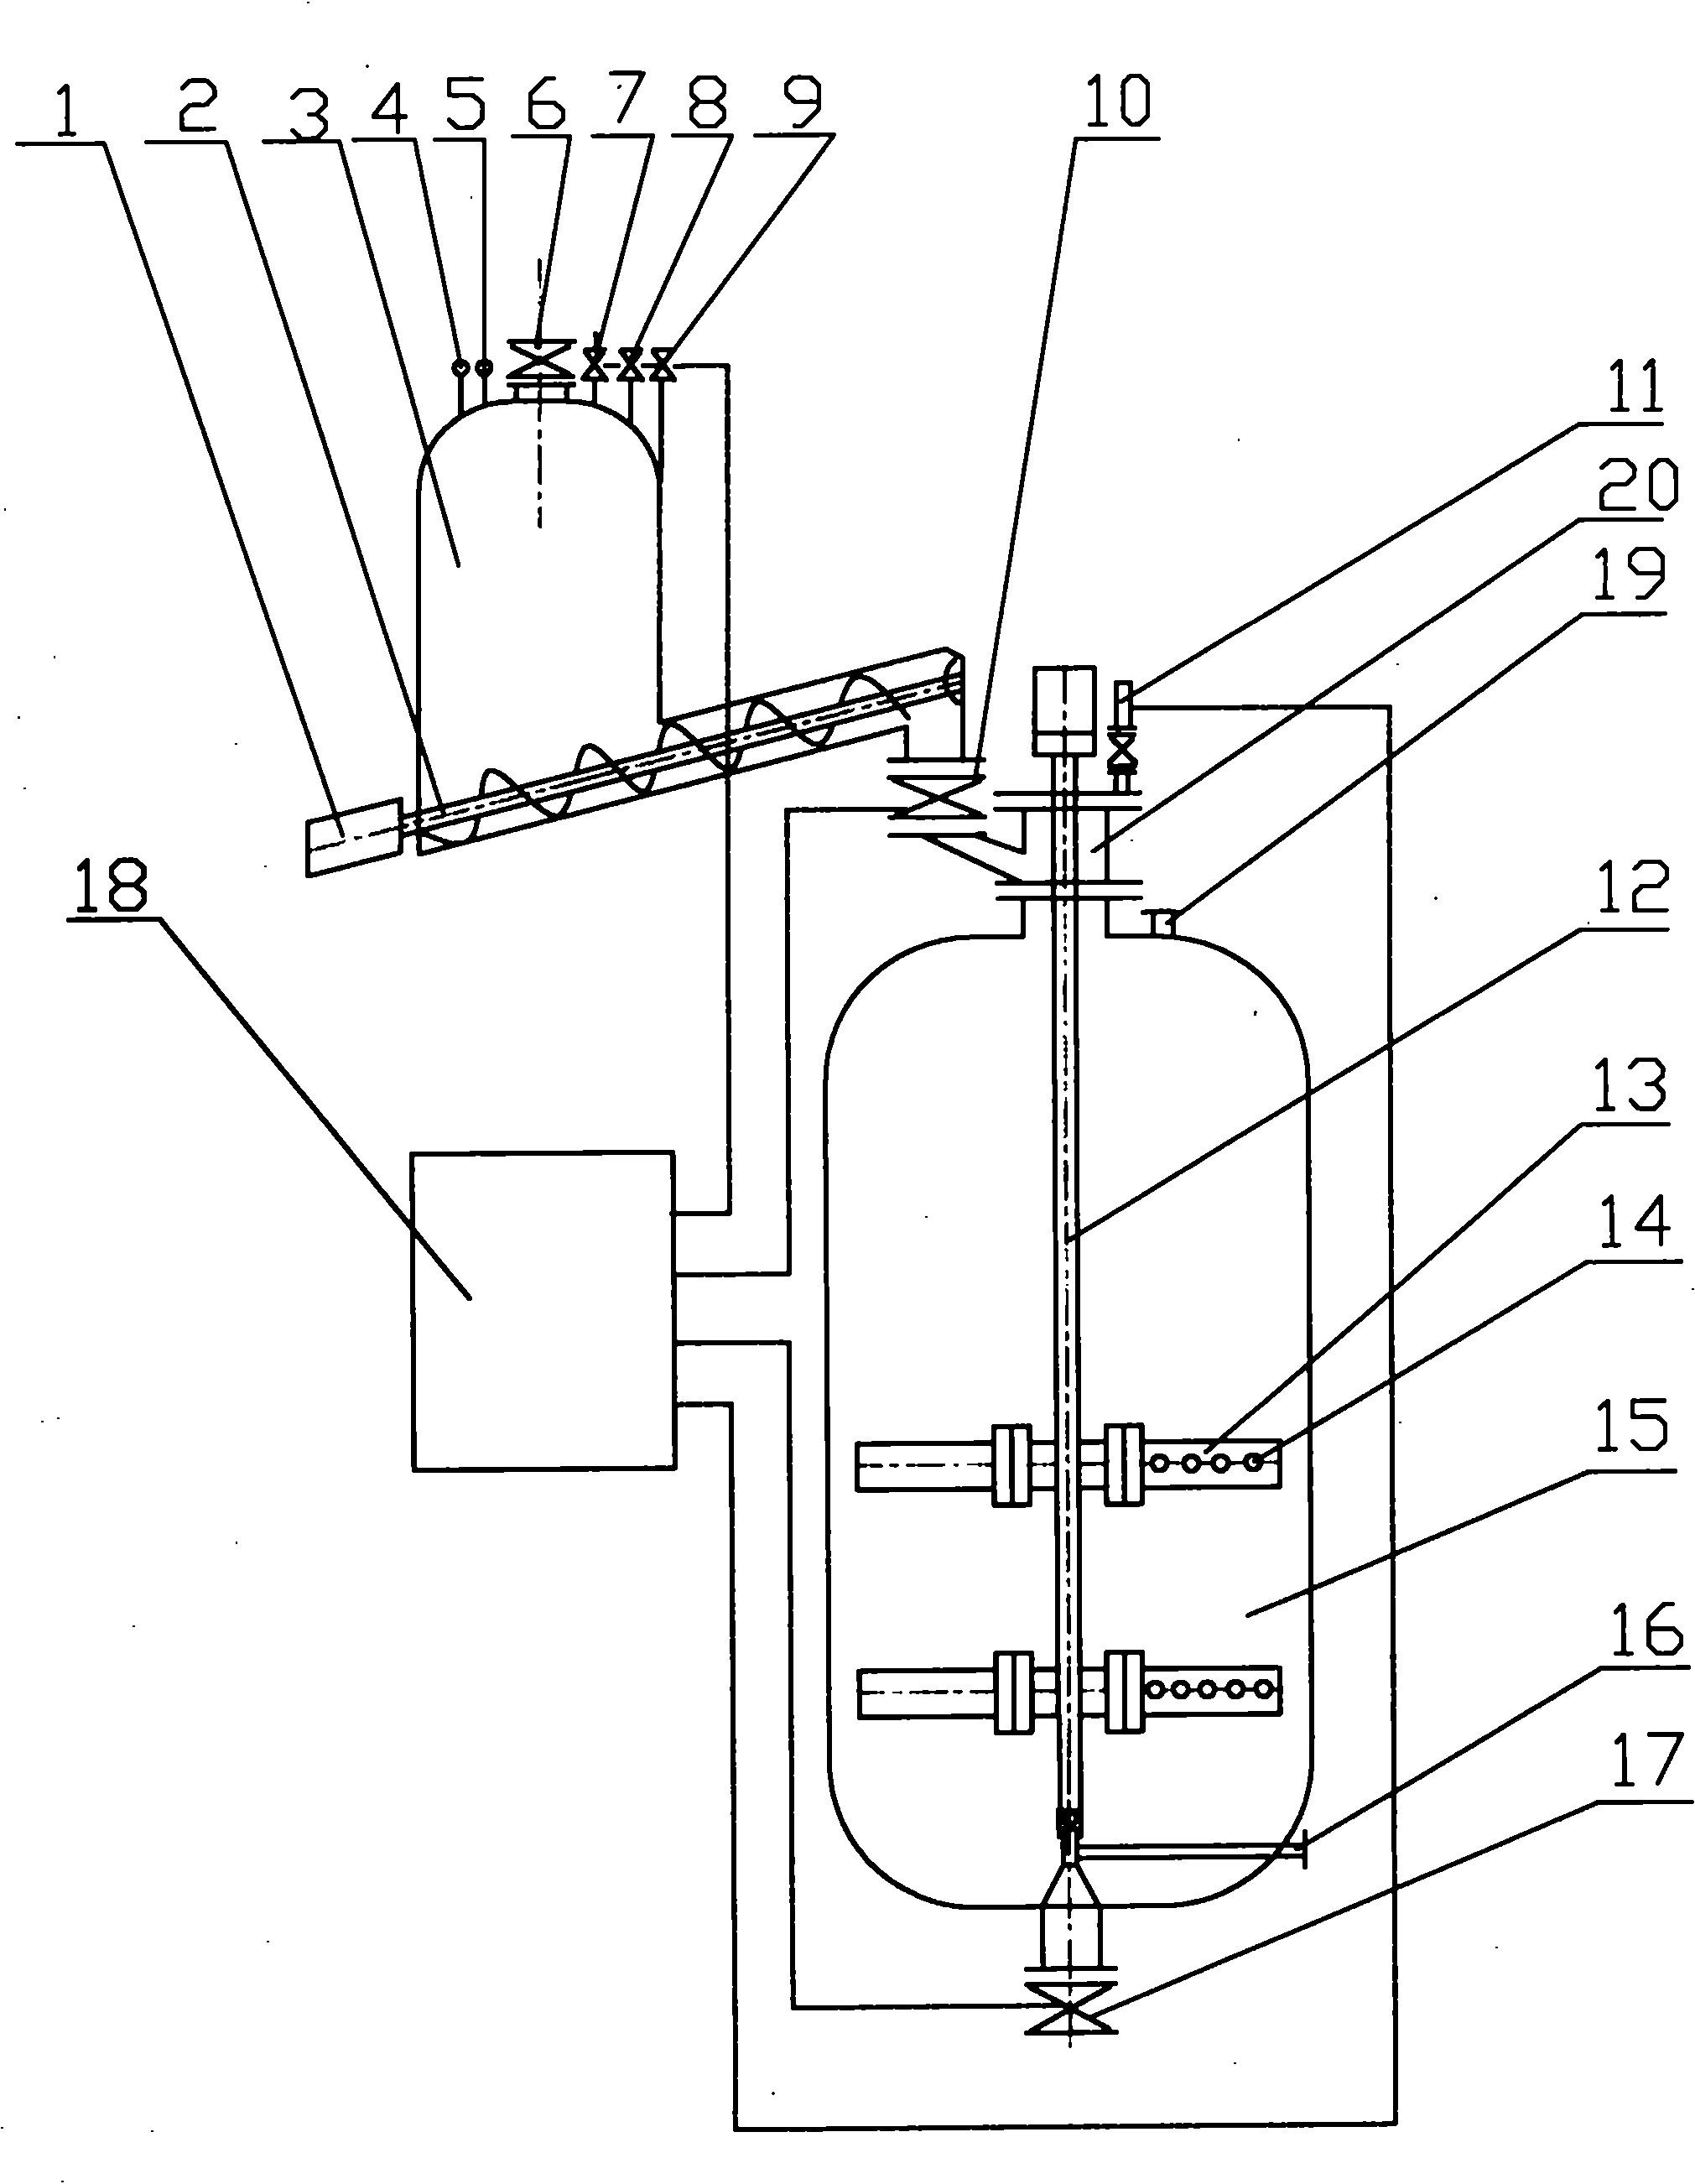 Continuous hydrolysis kettle converted from furfural intermittent hydrolysis kettle